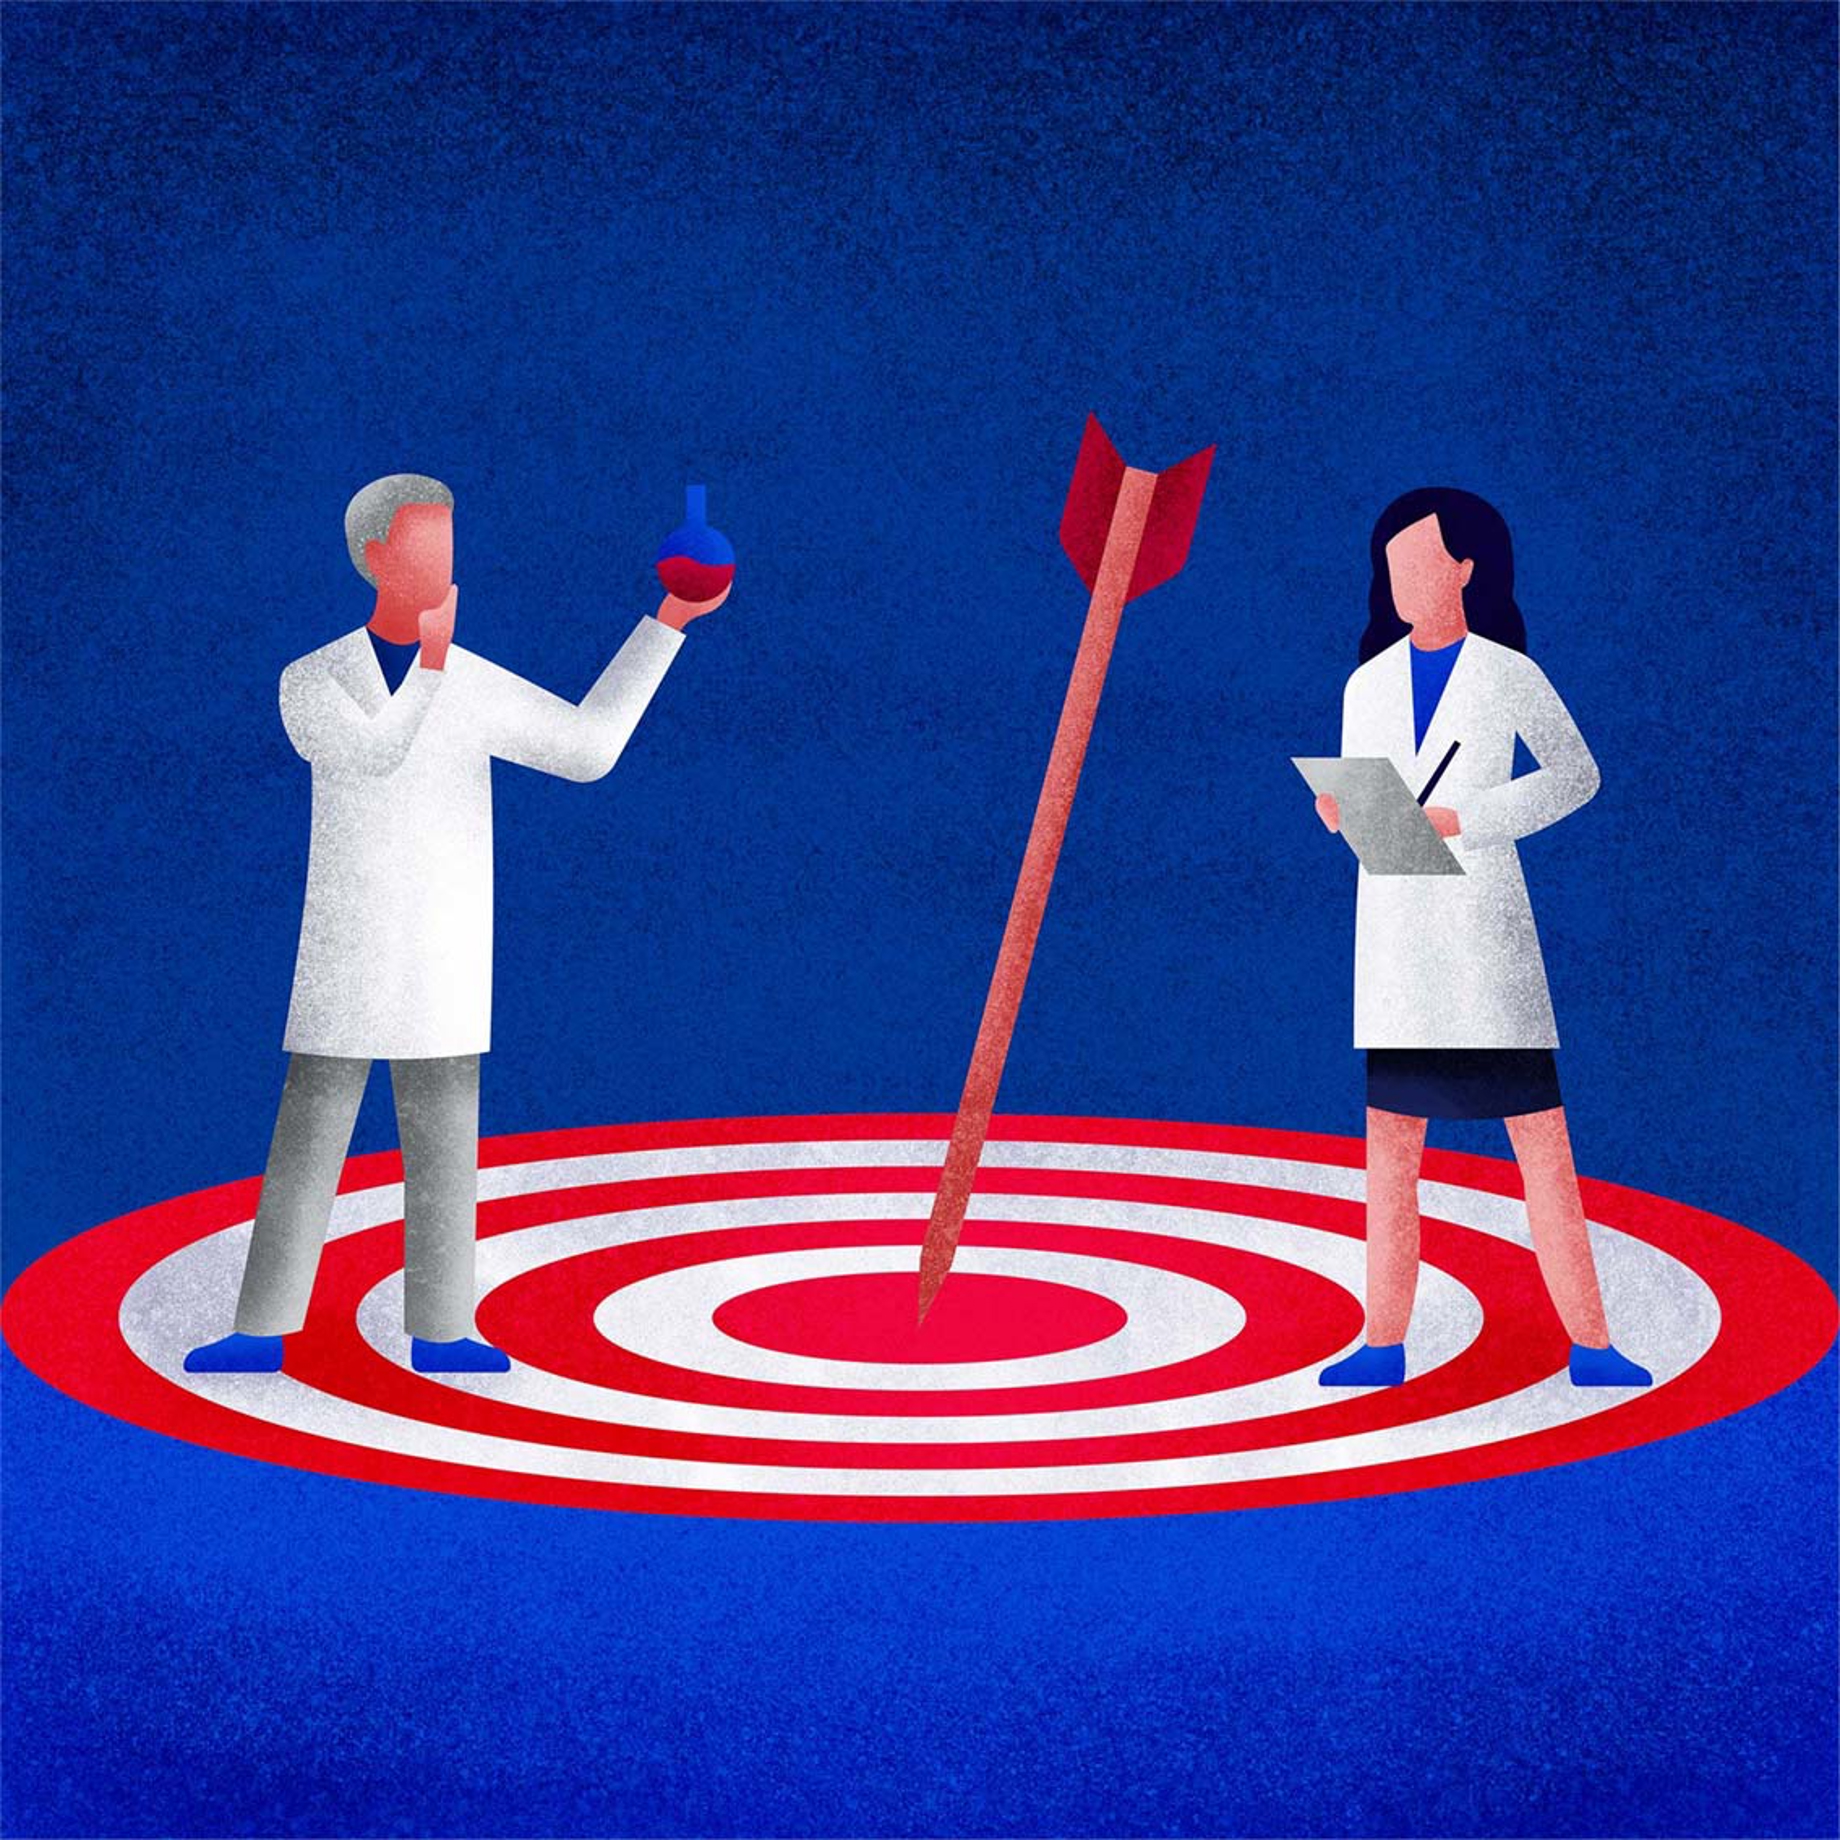 What are science based targets?